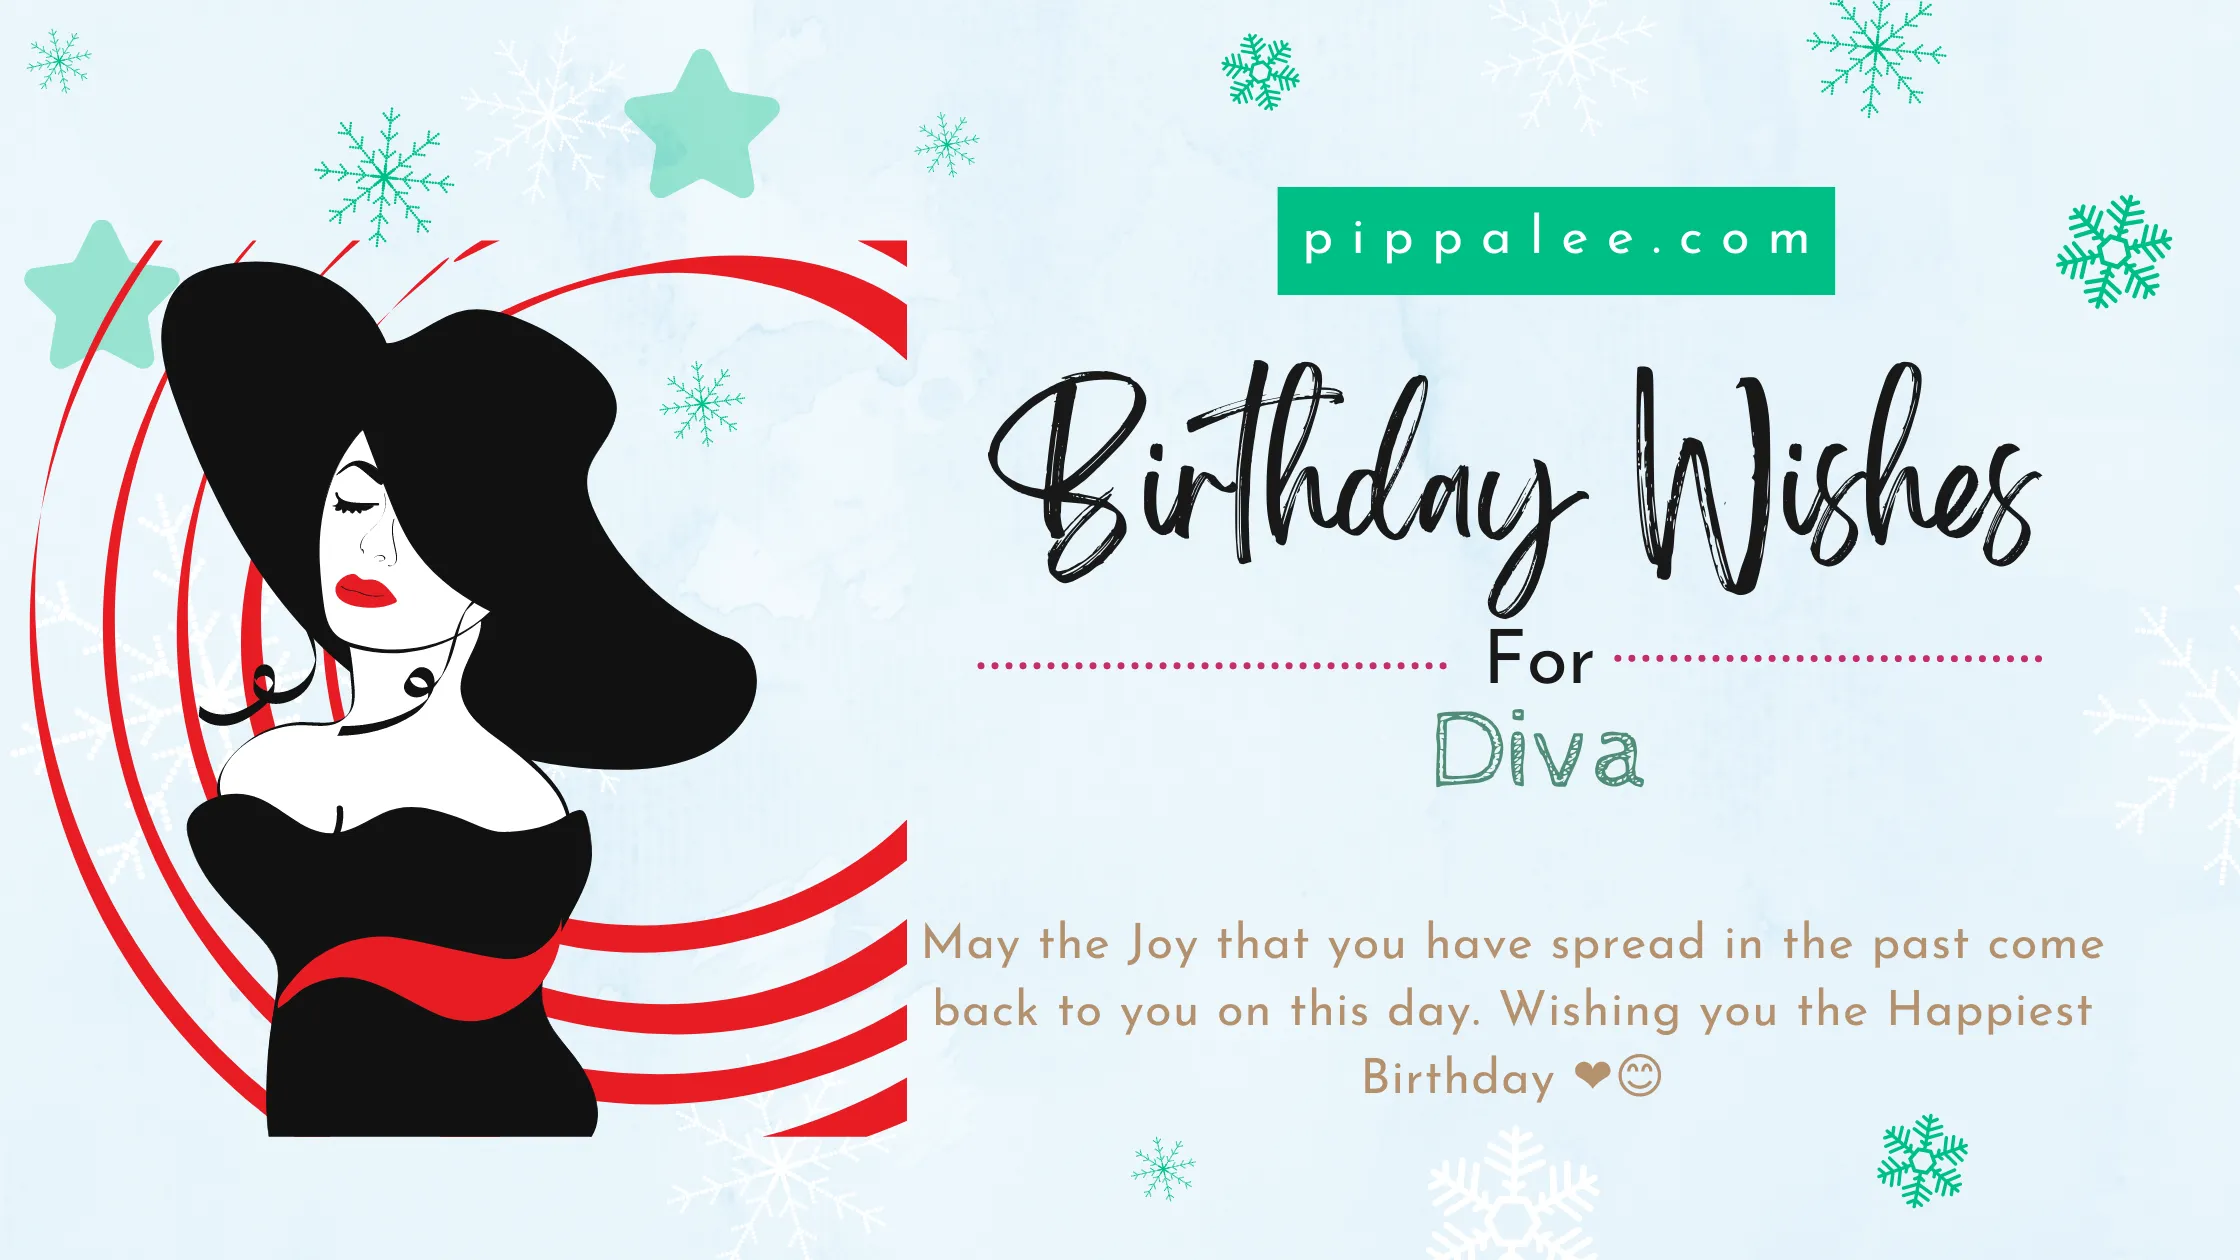 Happy Birthday For Diva - Wishes & Messages